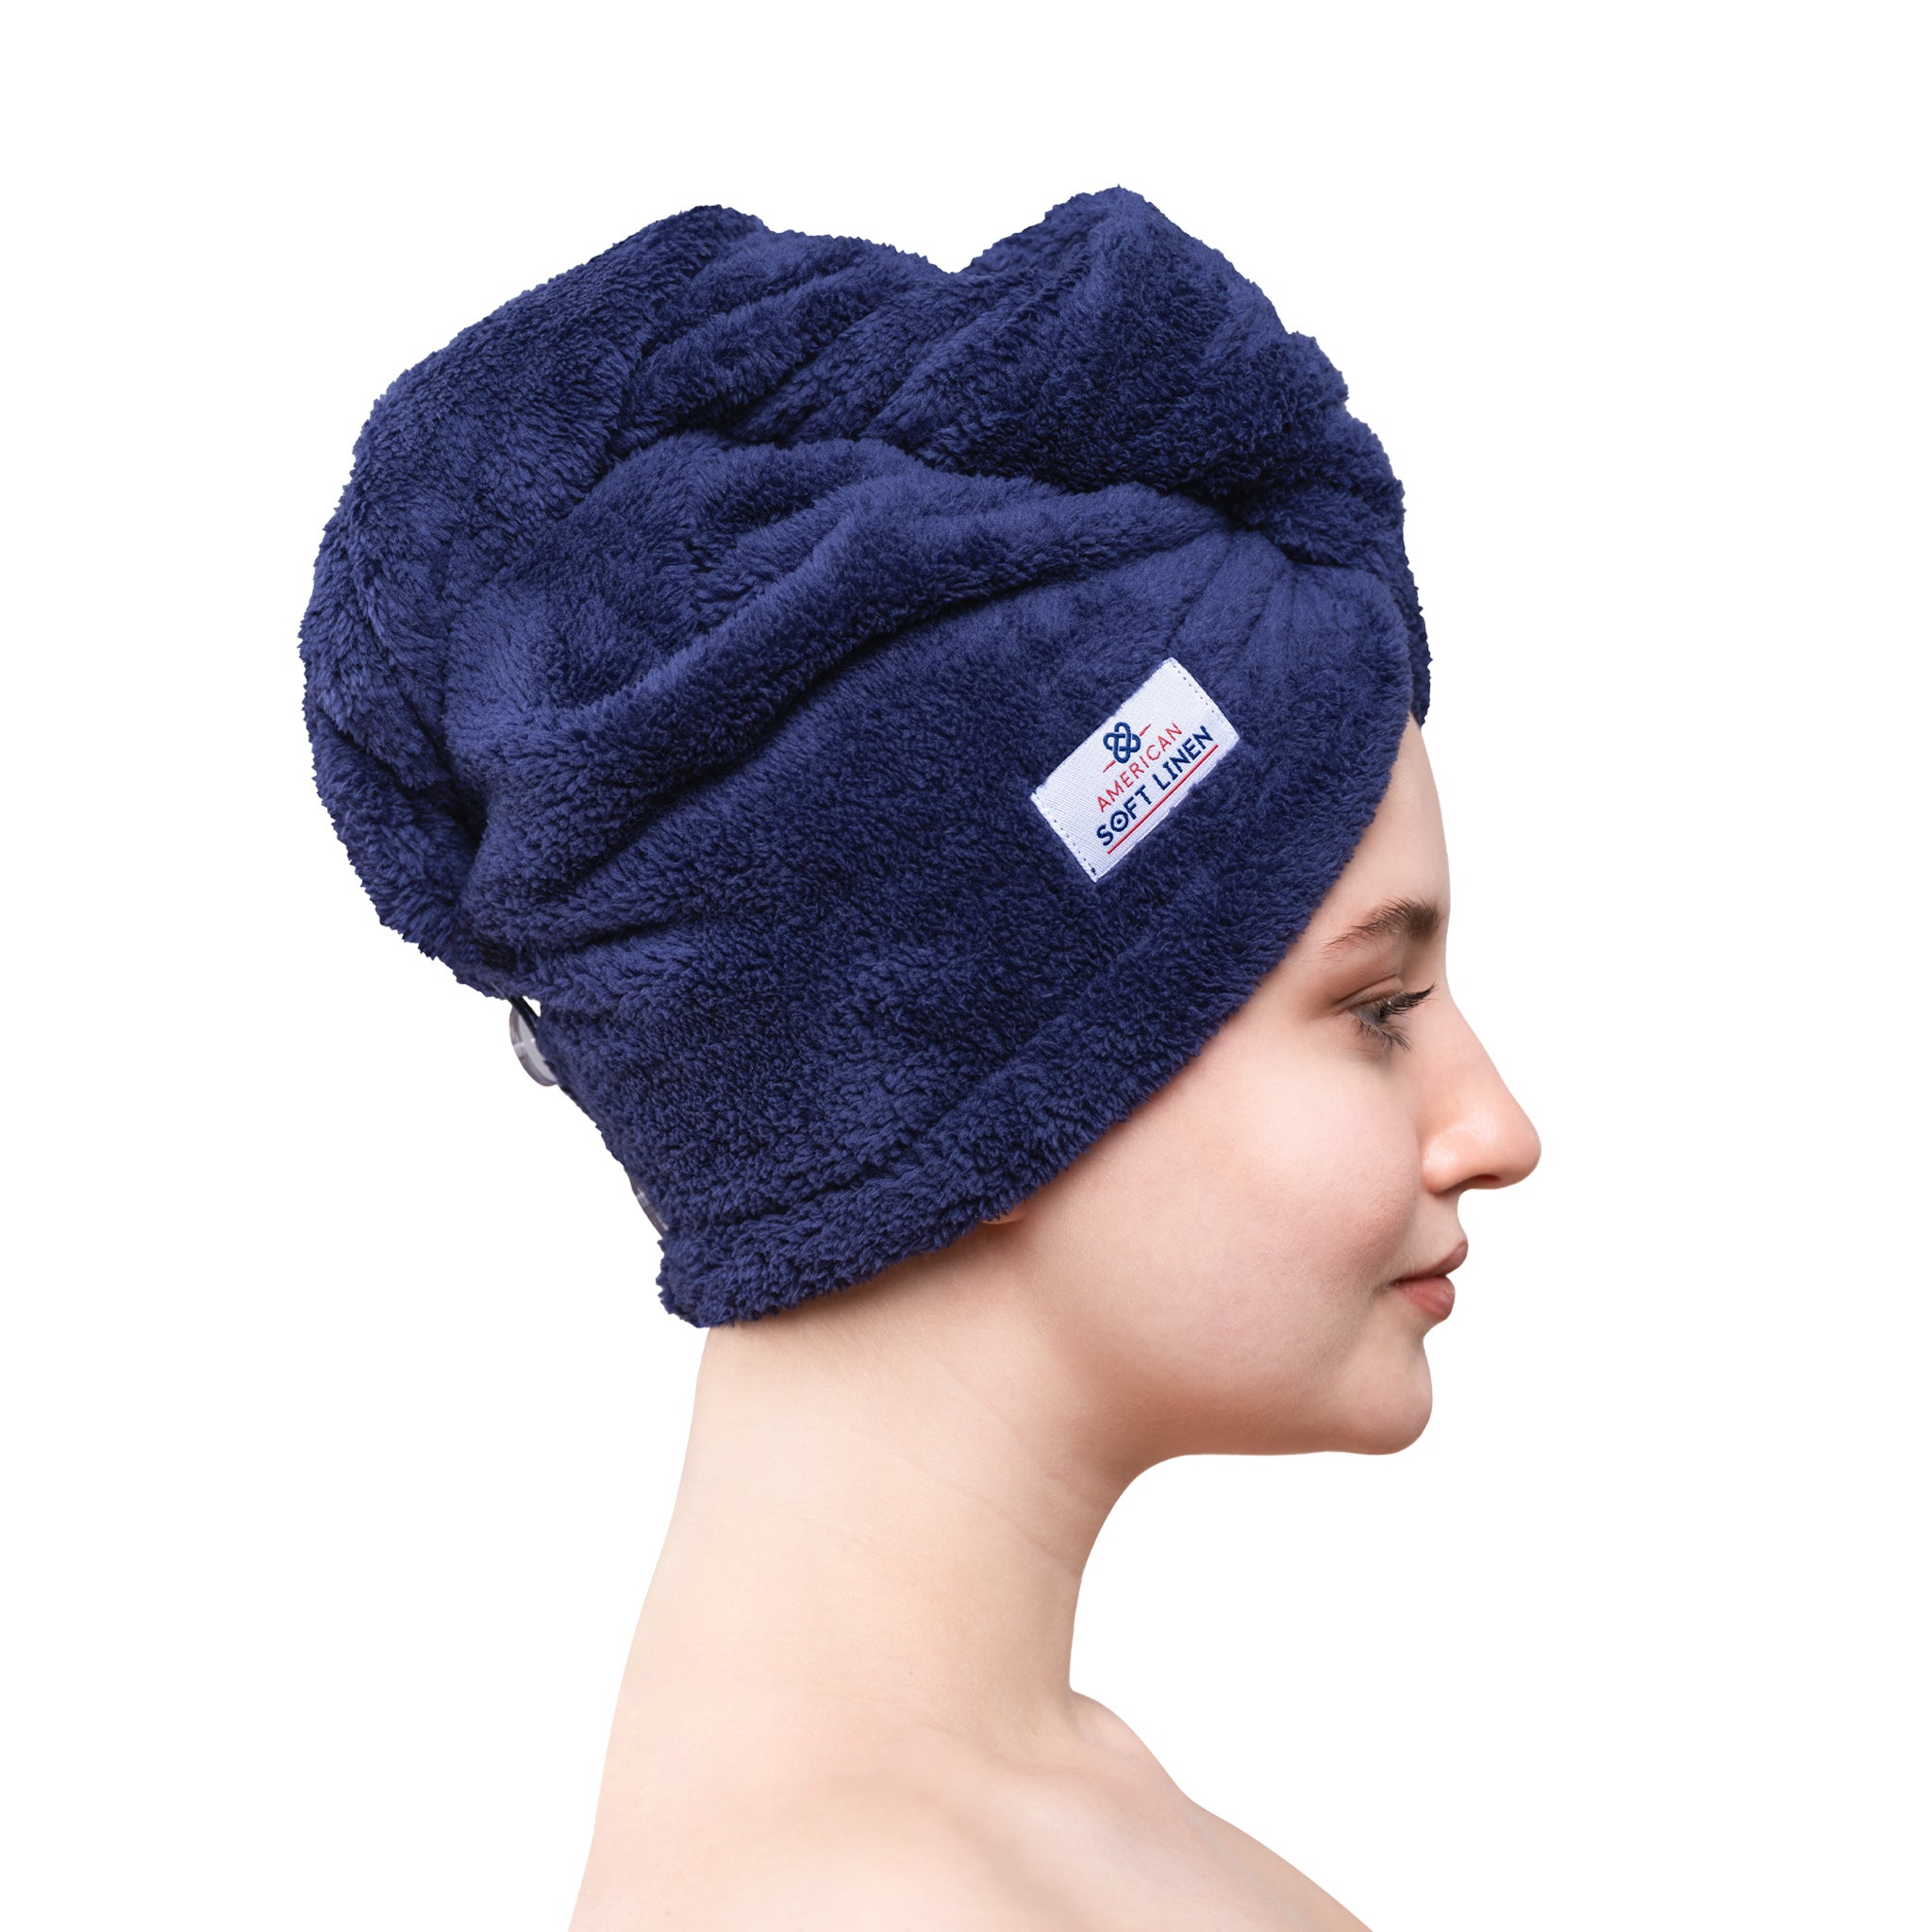 American Soft Linen Extremely Soft Super Absorbent and Fast Drying Hair Towel -blue-2